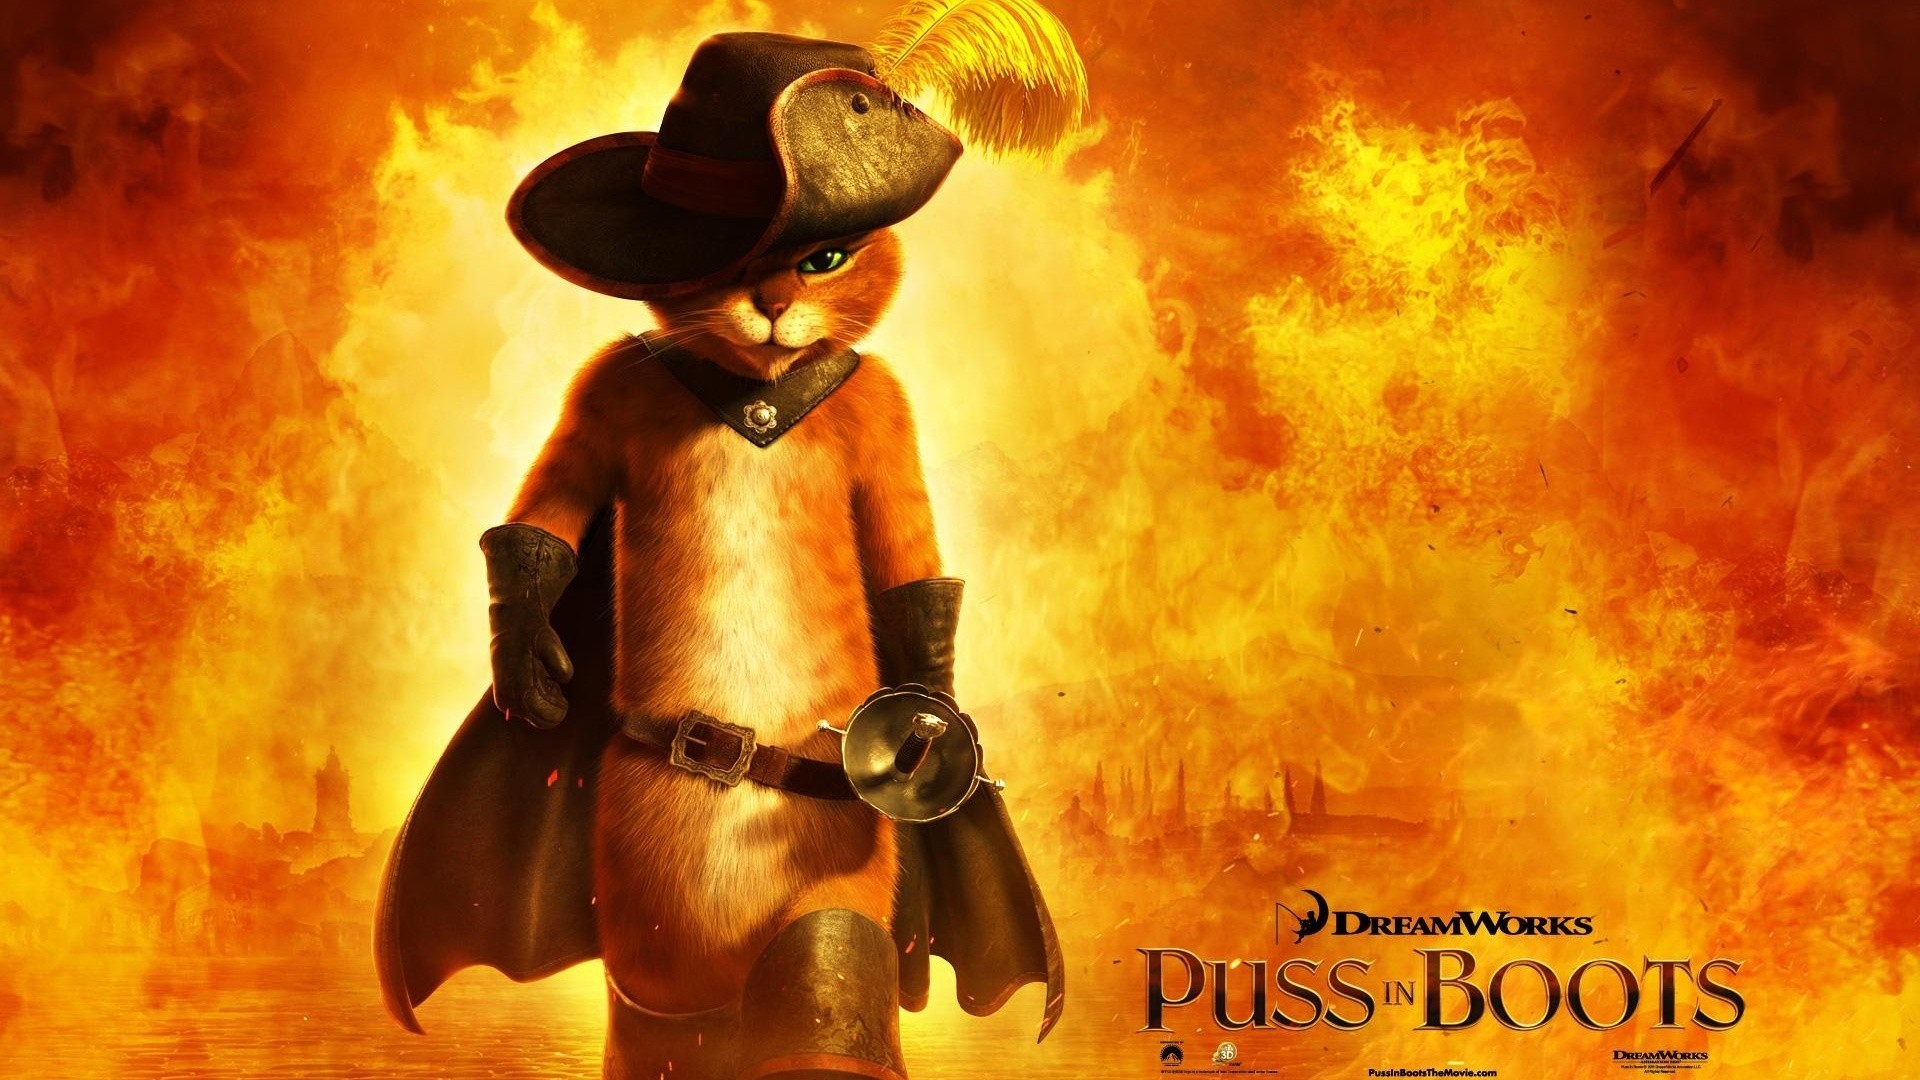 General 1920x1080 movies Puss in Boots animated movies 2011 (Year)